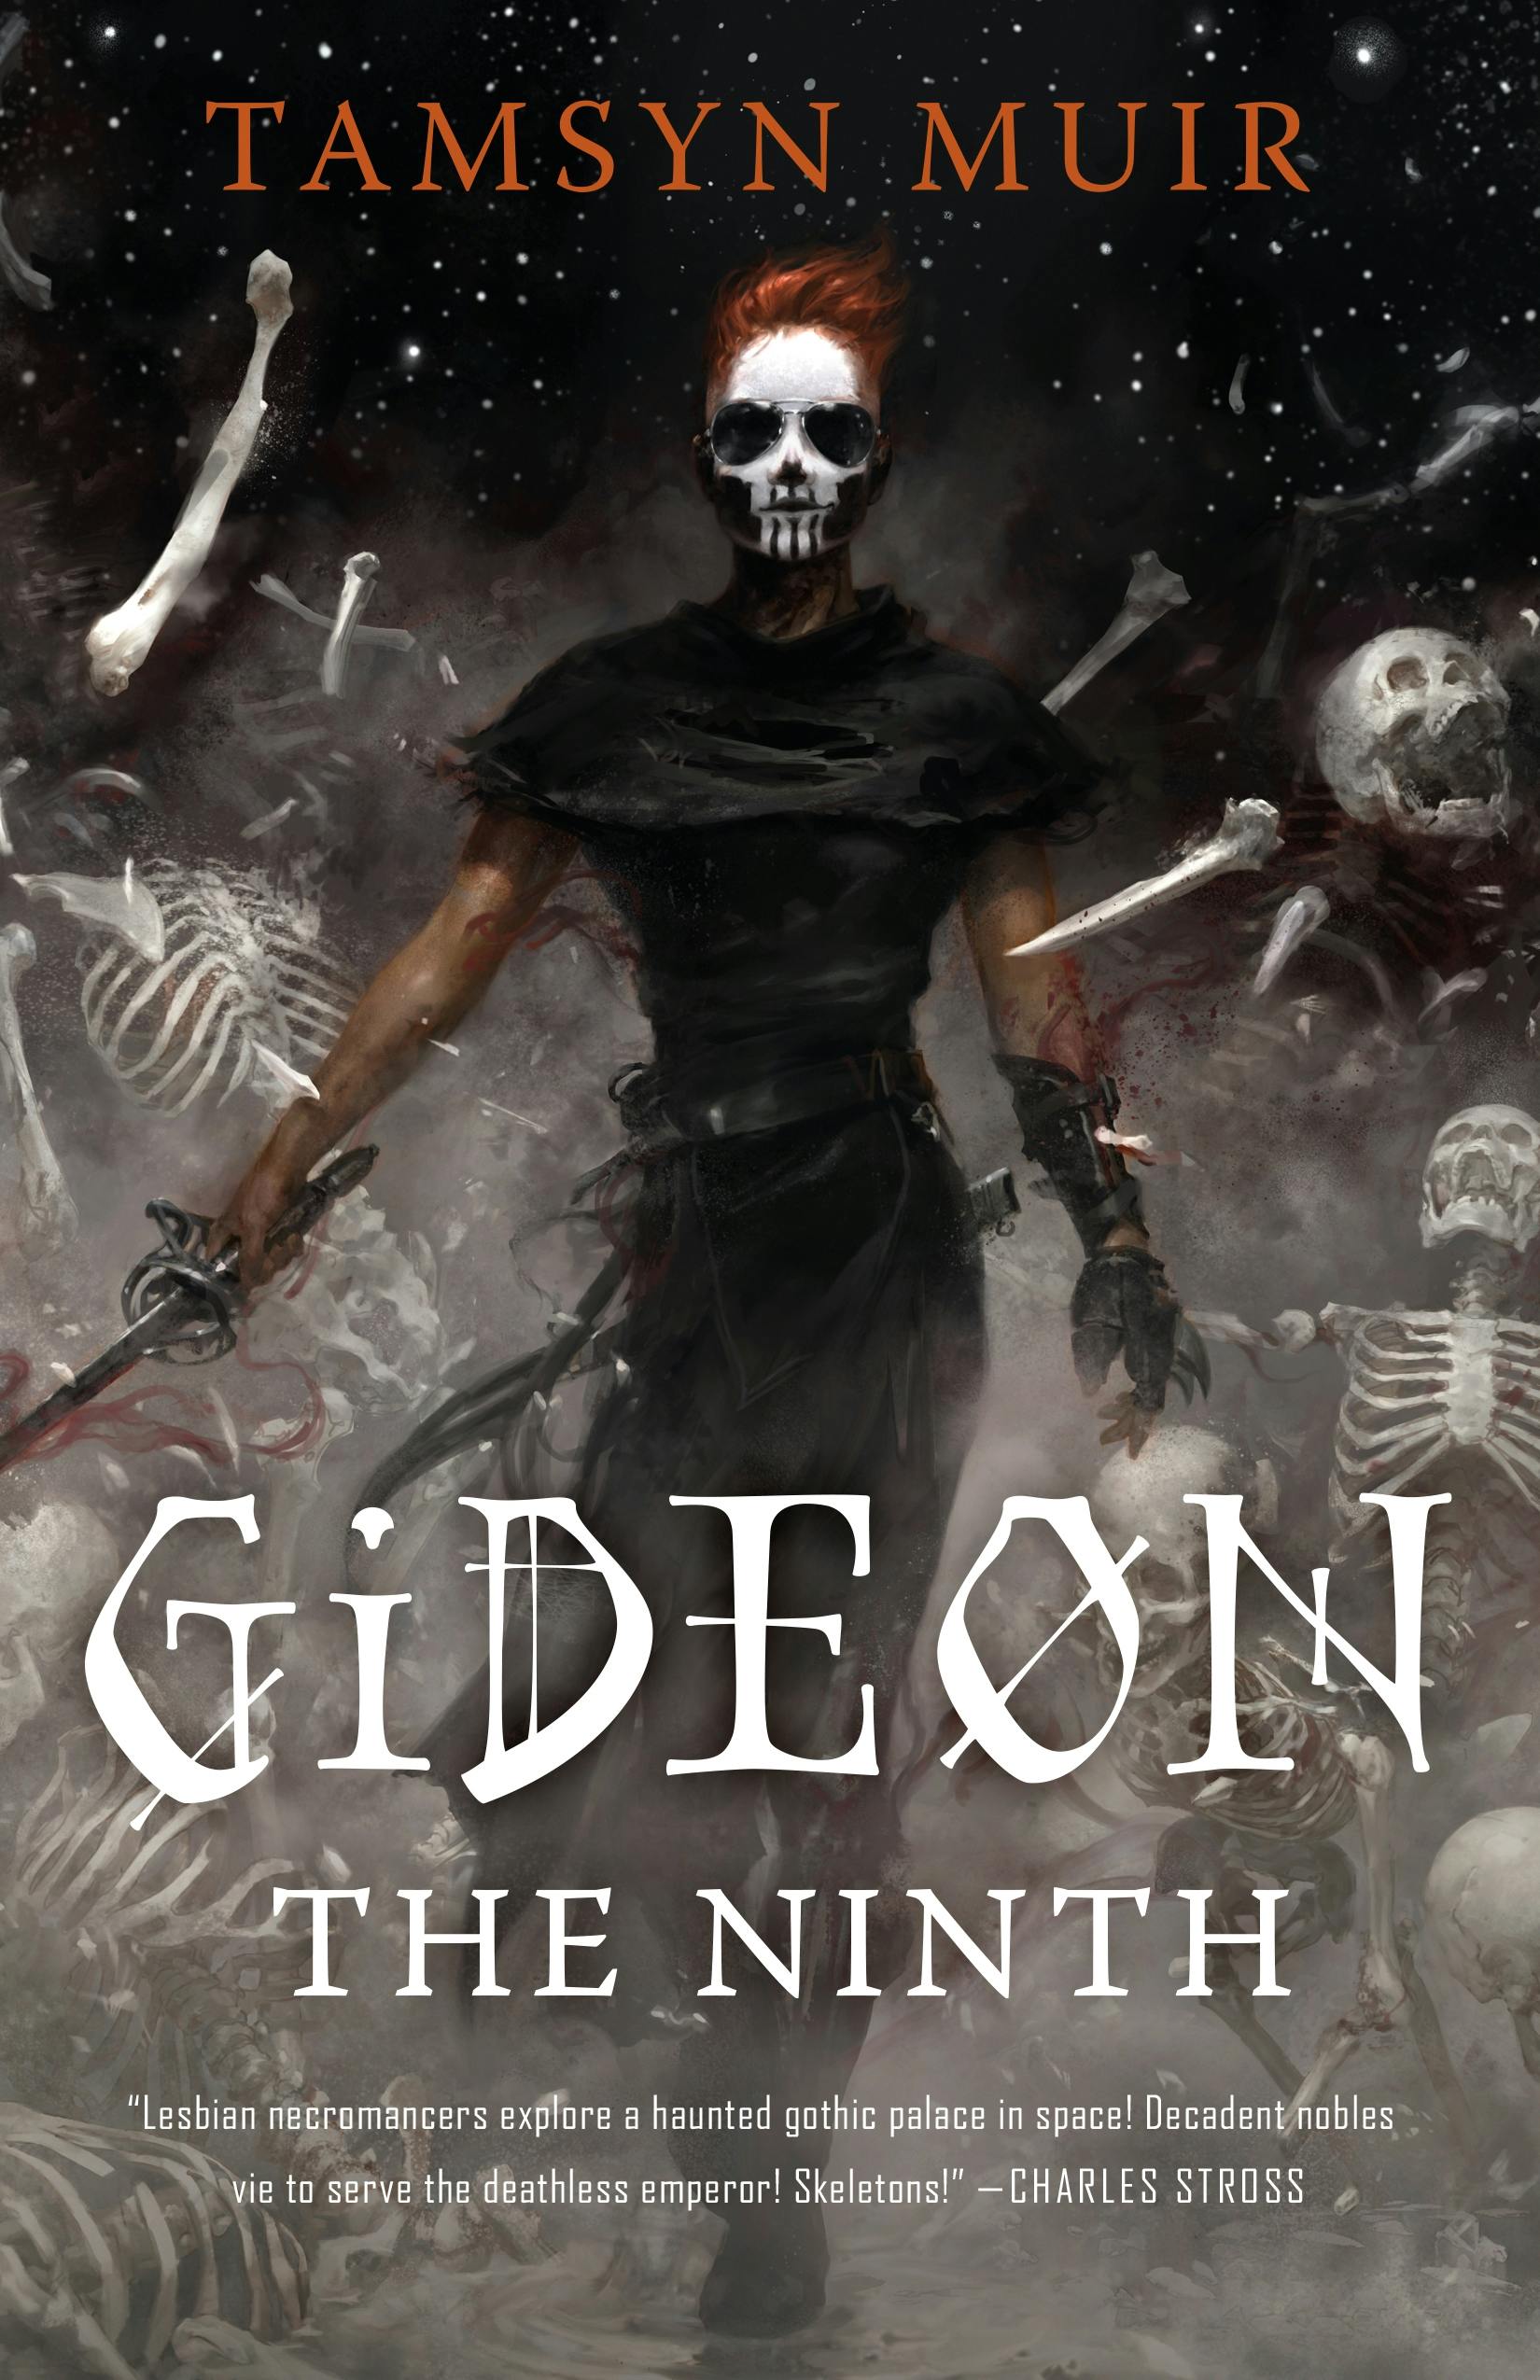 Cover for the book titled as: Gideon the Ninth